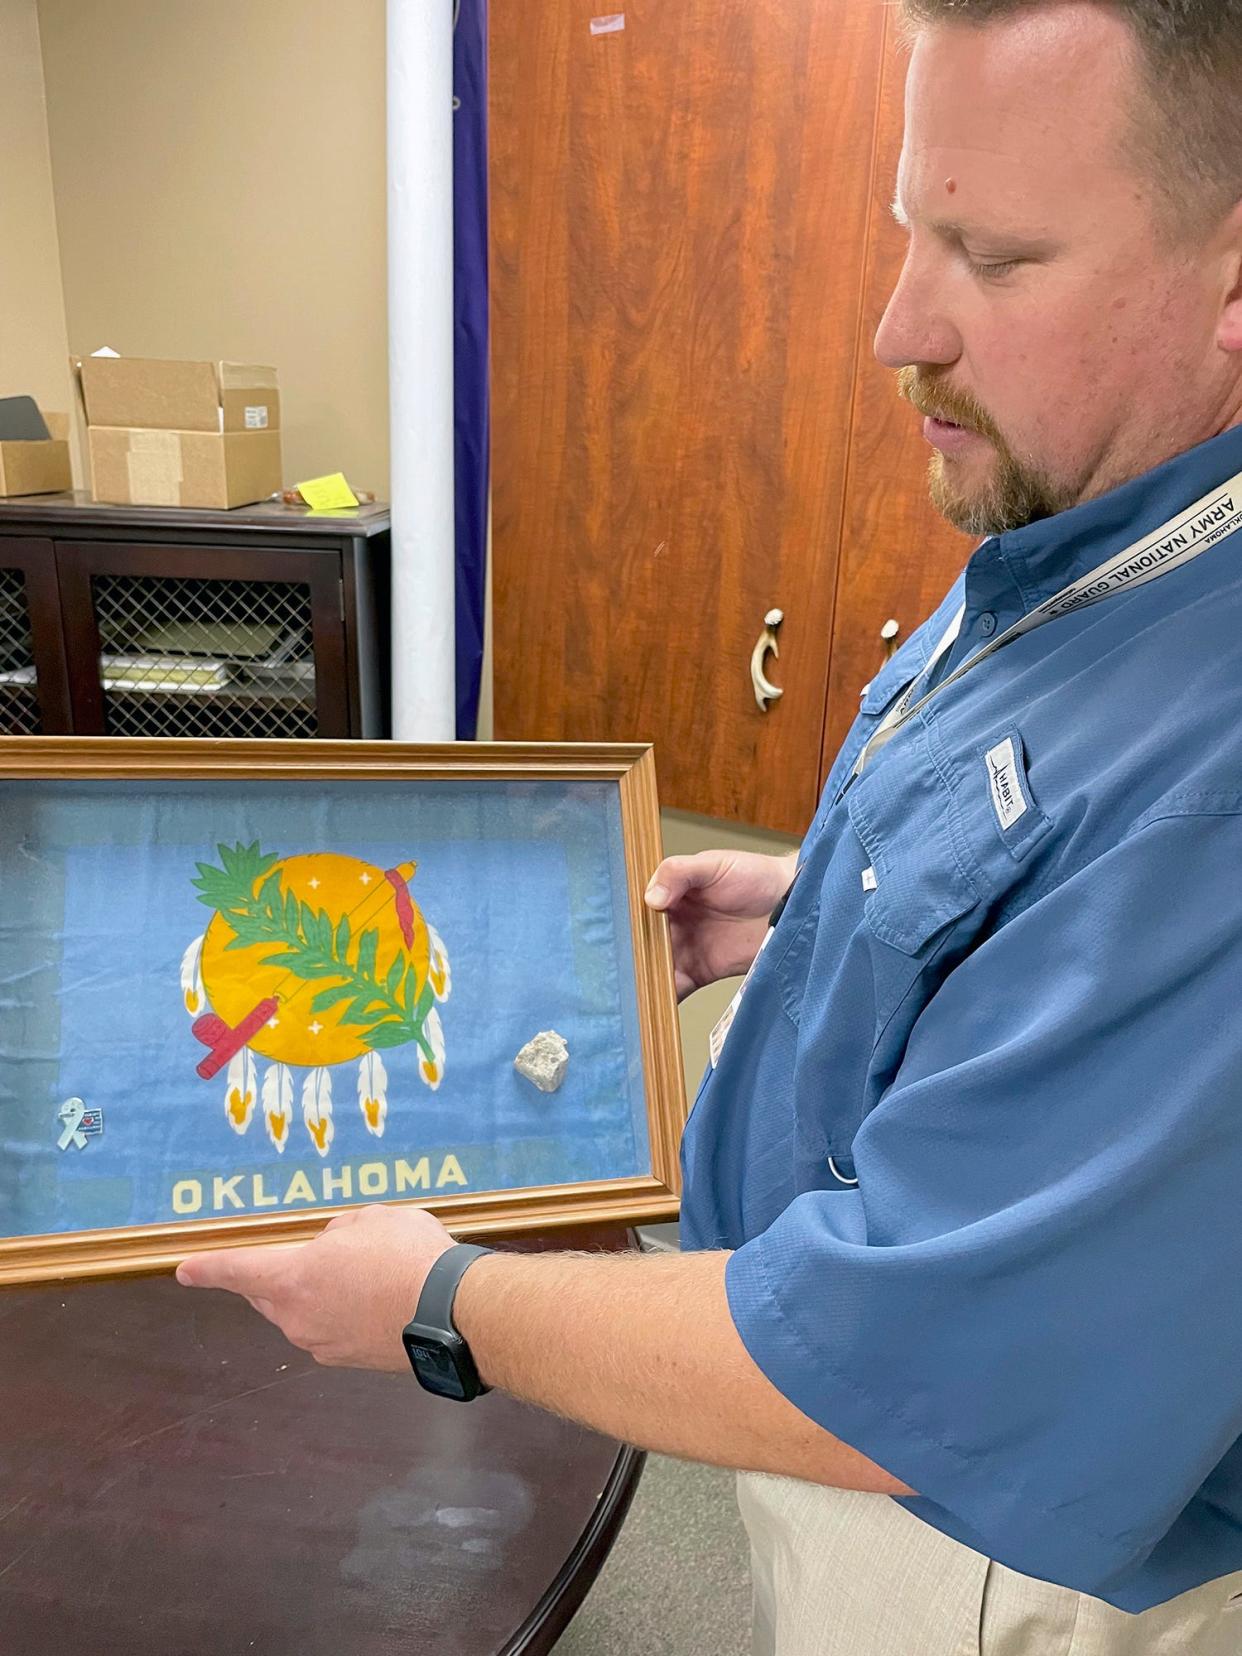 Kyle Genzer, principal of Mannford High School in Mannford, keeps a framed flag and fragment from the Alfred P. Murrah Federal Building on the wall in front of his desk in his office. He is the son of Jamie Genzer, who was 32 when she died in the 1995 bombing of the federal building in Oklahoma City. [Photo by Pam Olson]